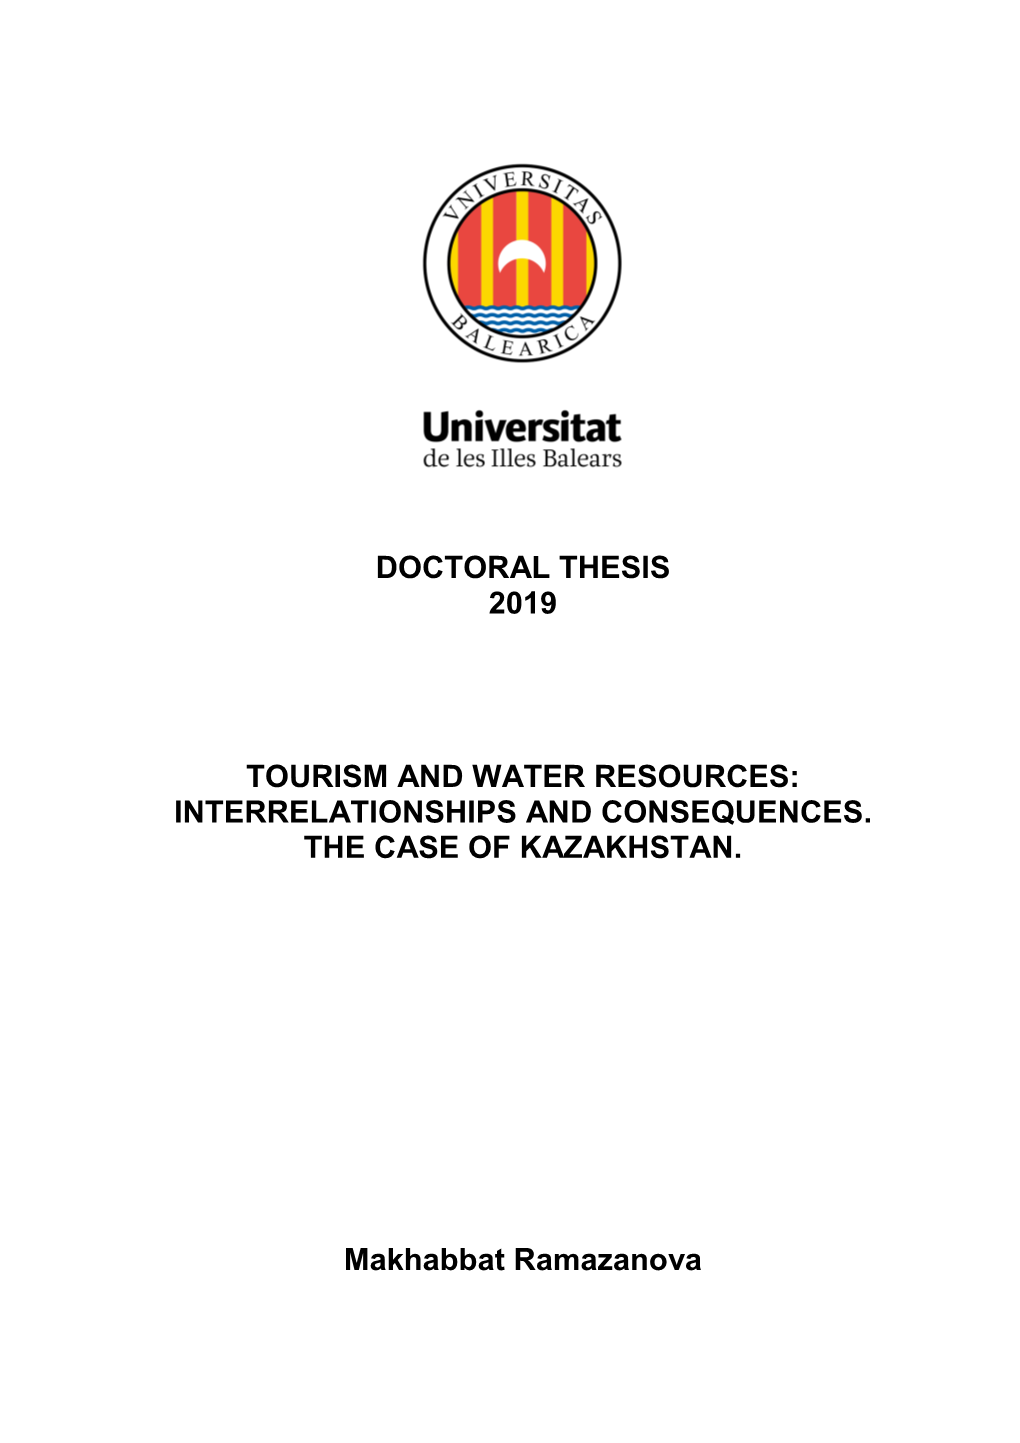 Doctoral Thesis 2019 Tourism and Water Resources